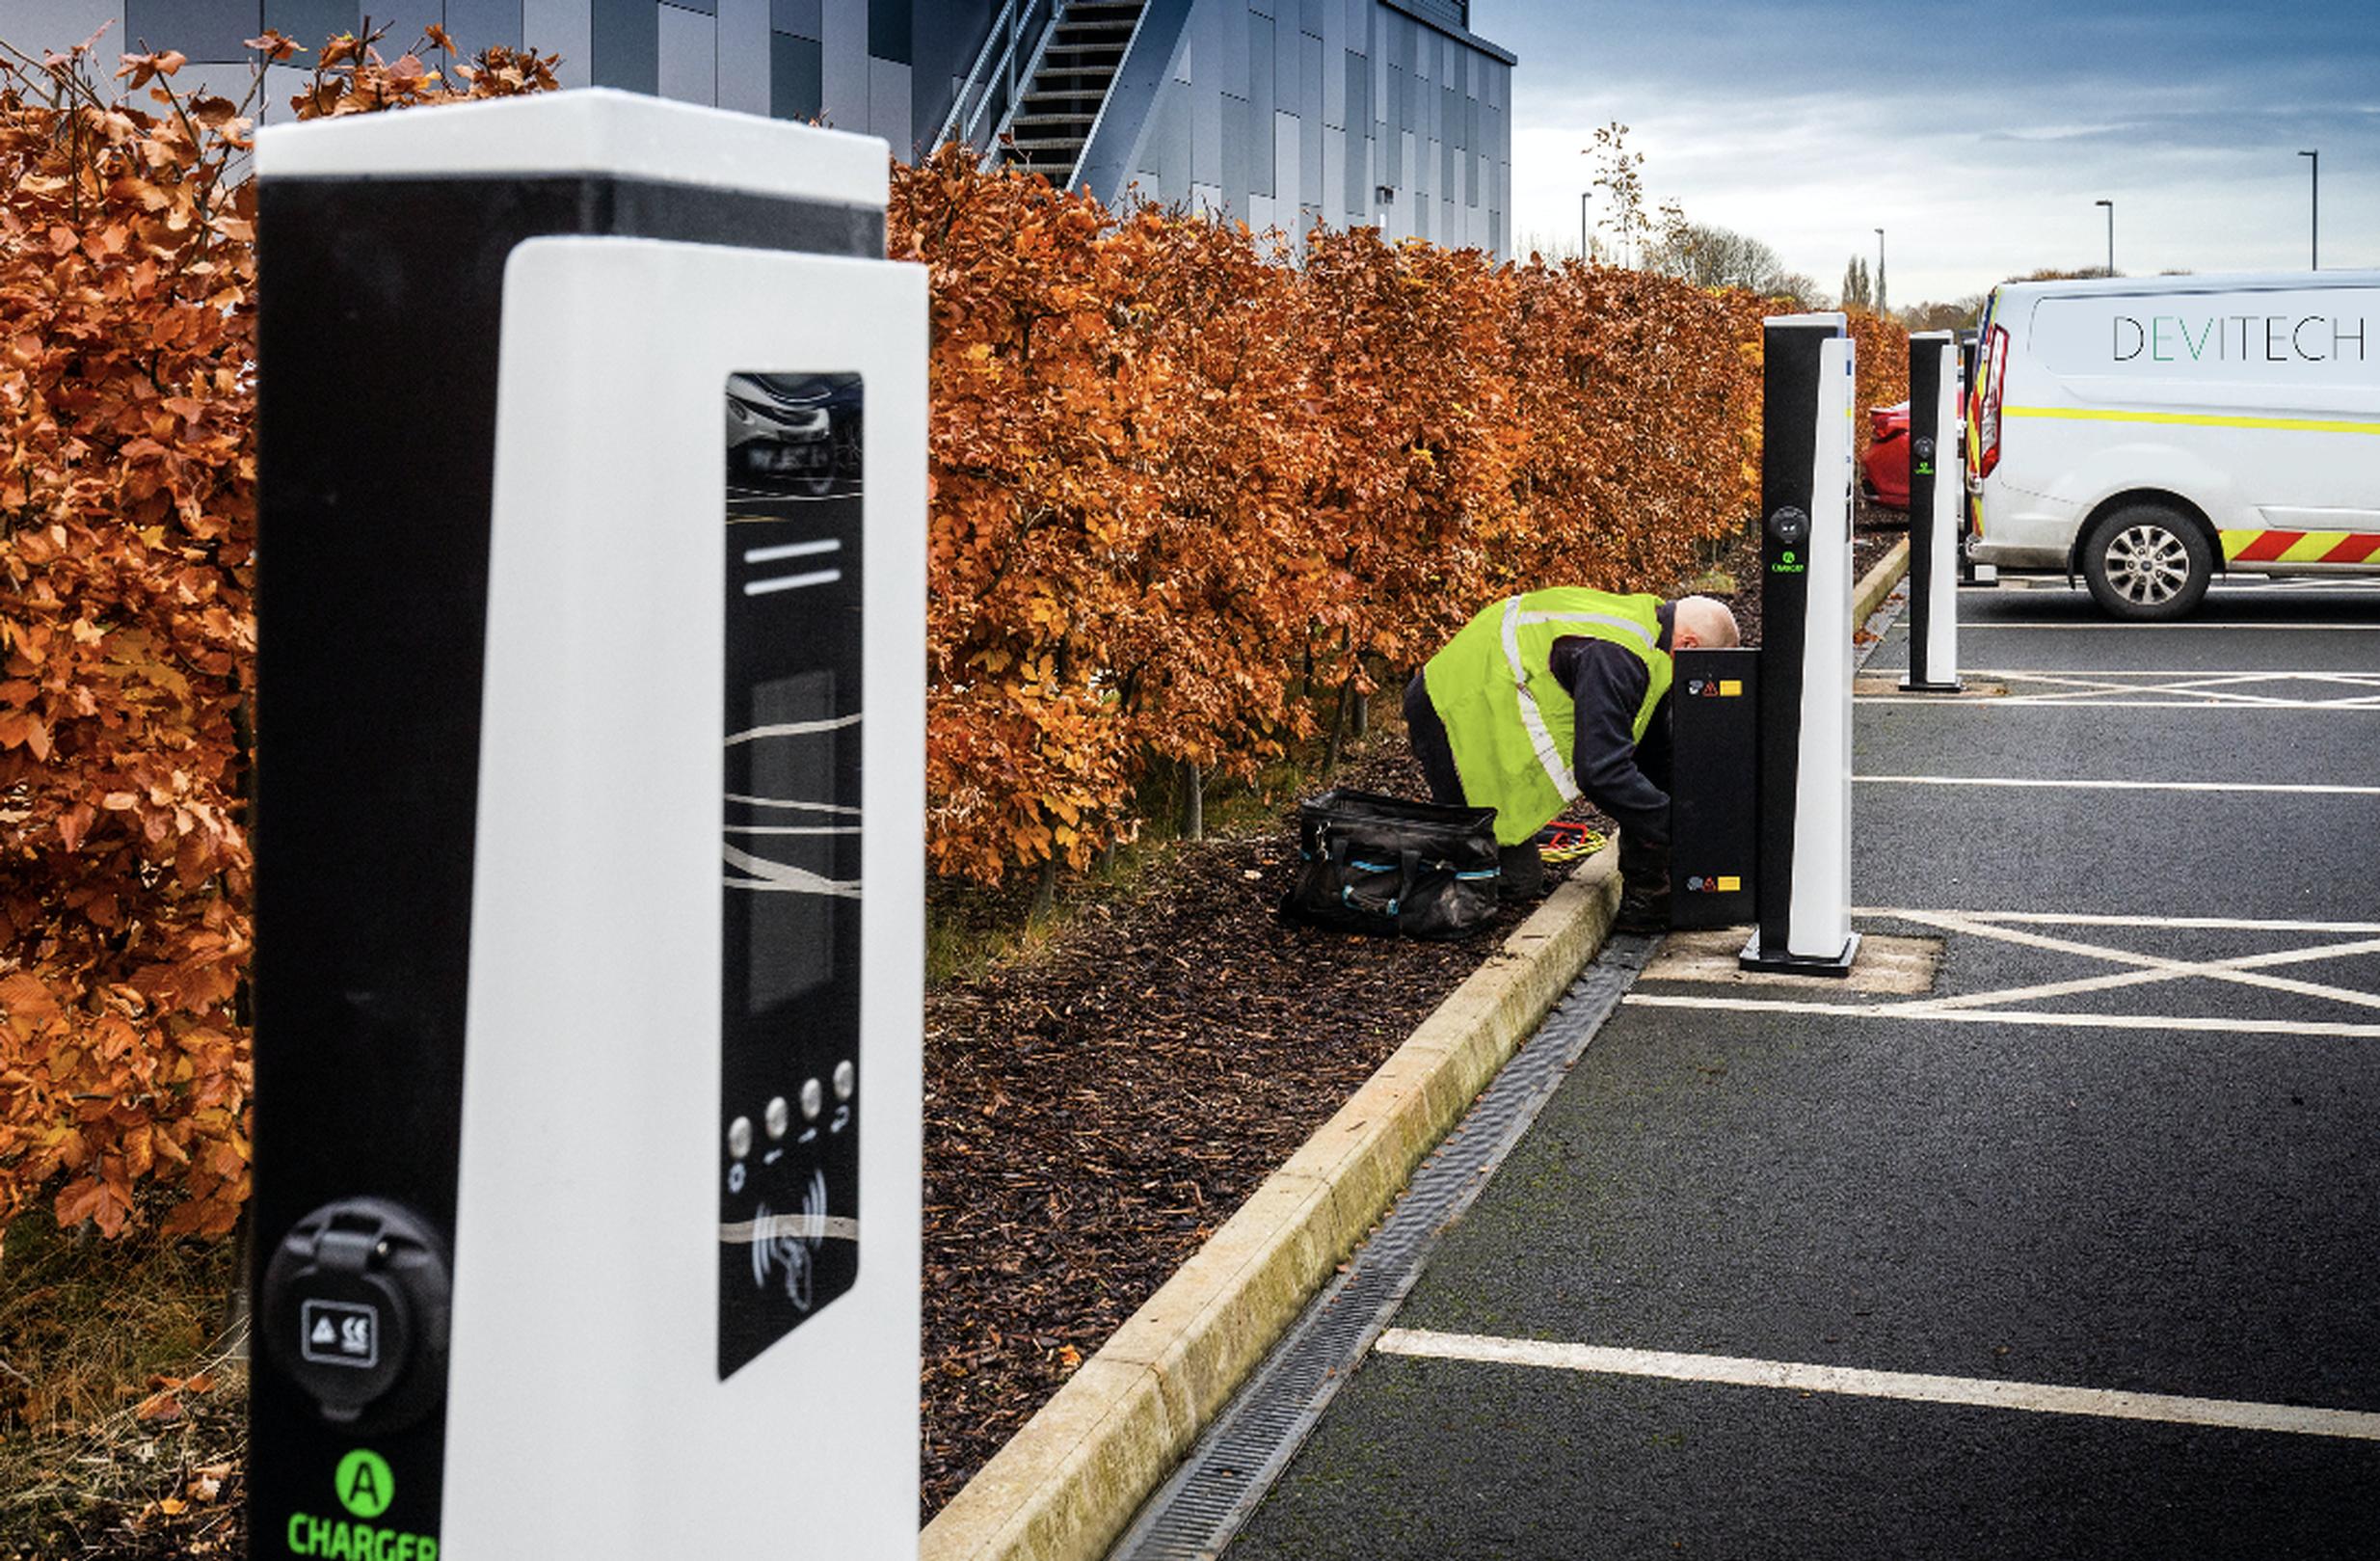 Aftercare should be considered an integral part of delivering an EV charger installation, not an optional extra